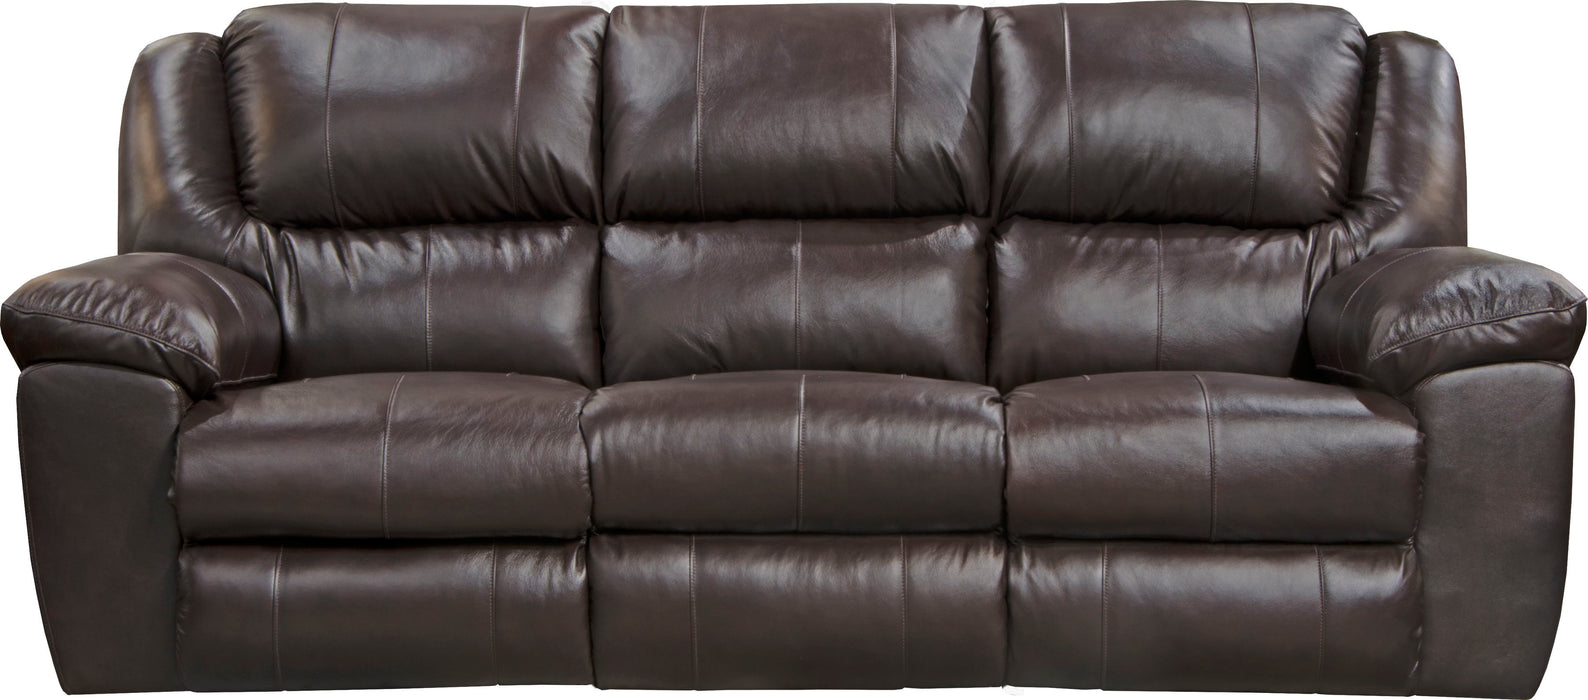 Transformer II - Ultimate Sofa With 3 Recliners & Drop Down Table